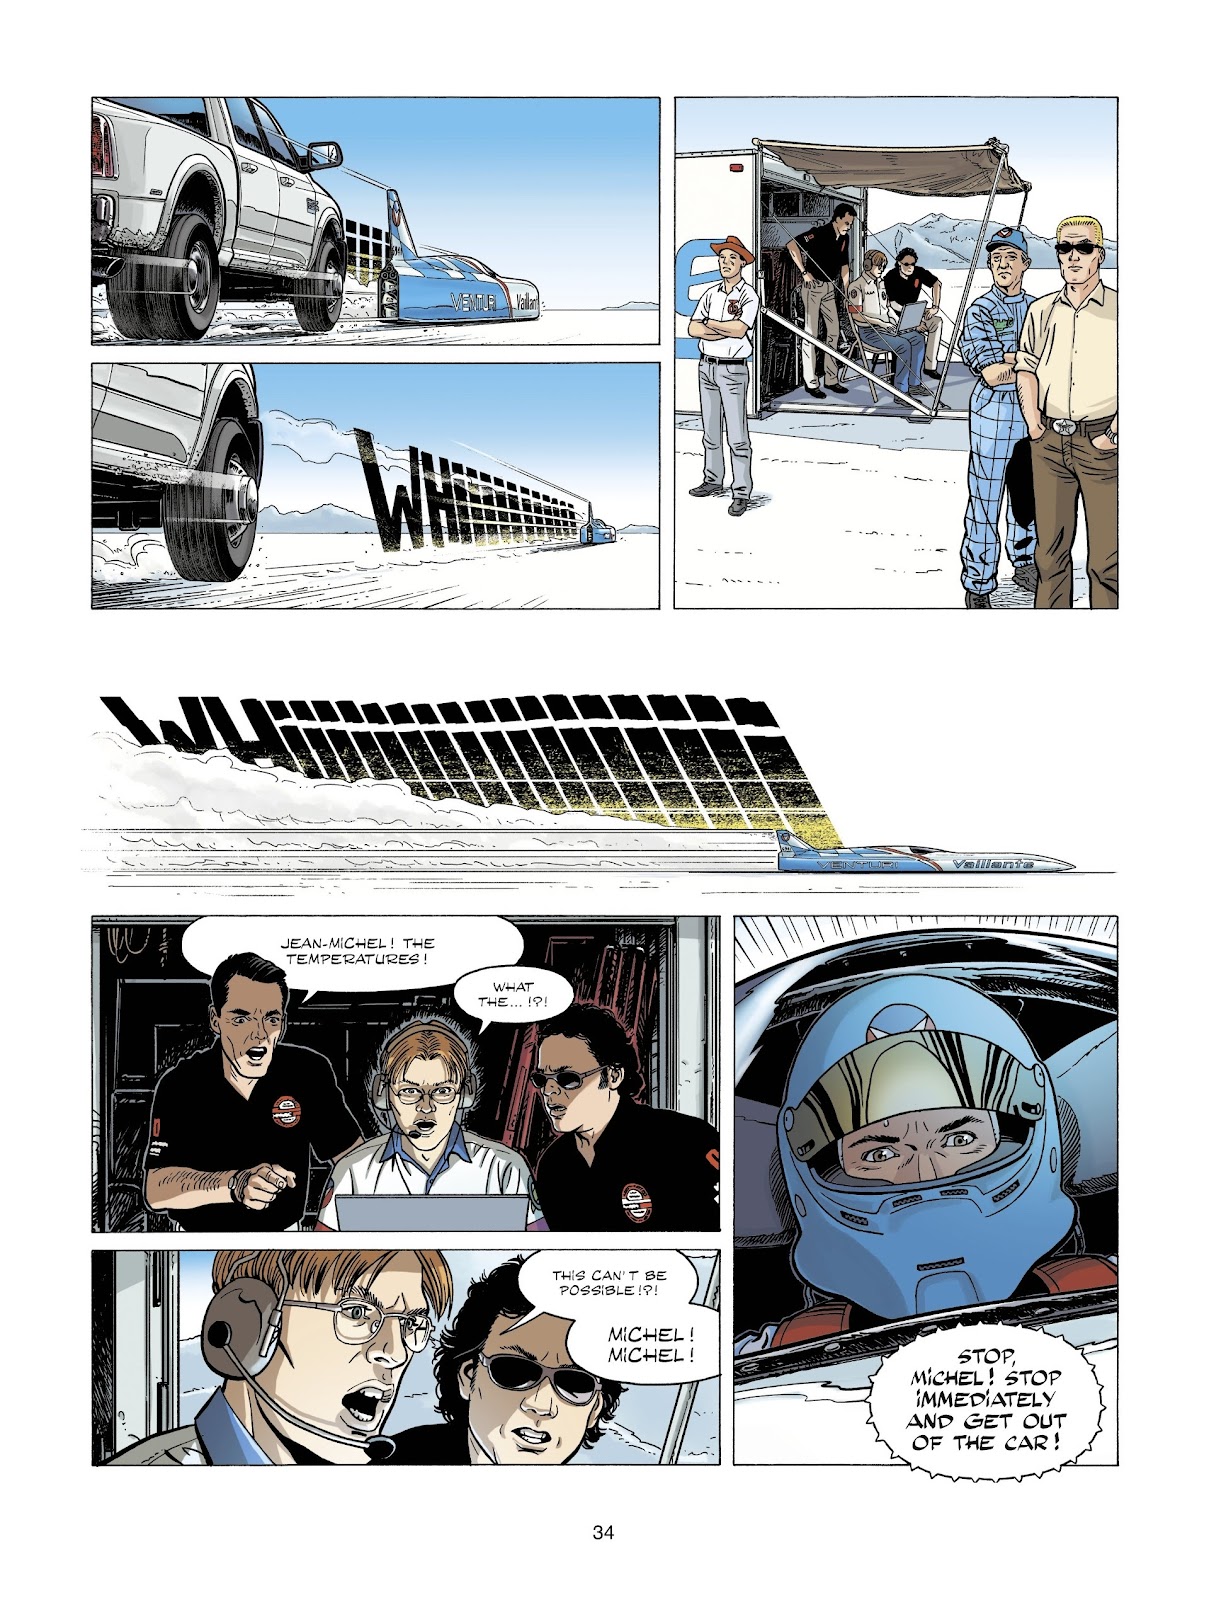 Michel Vaillant issue 2 - Page 34